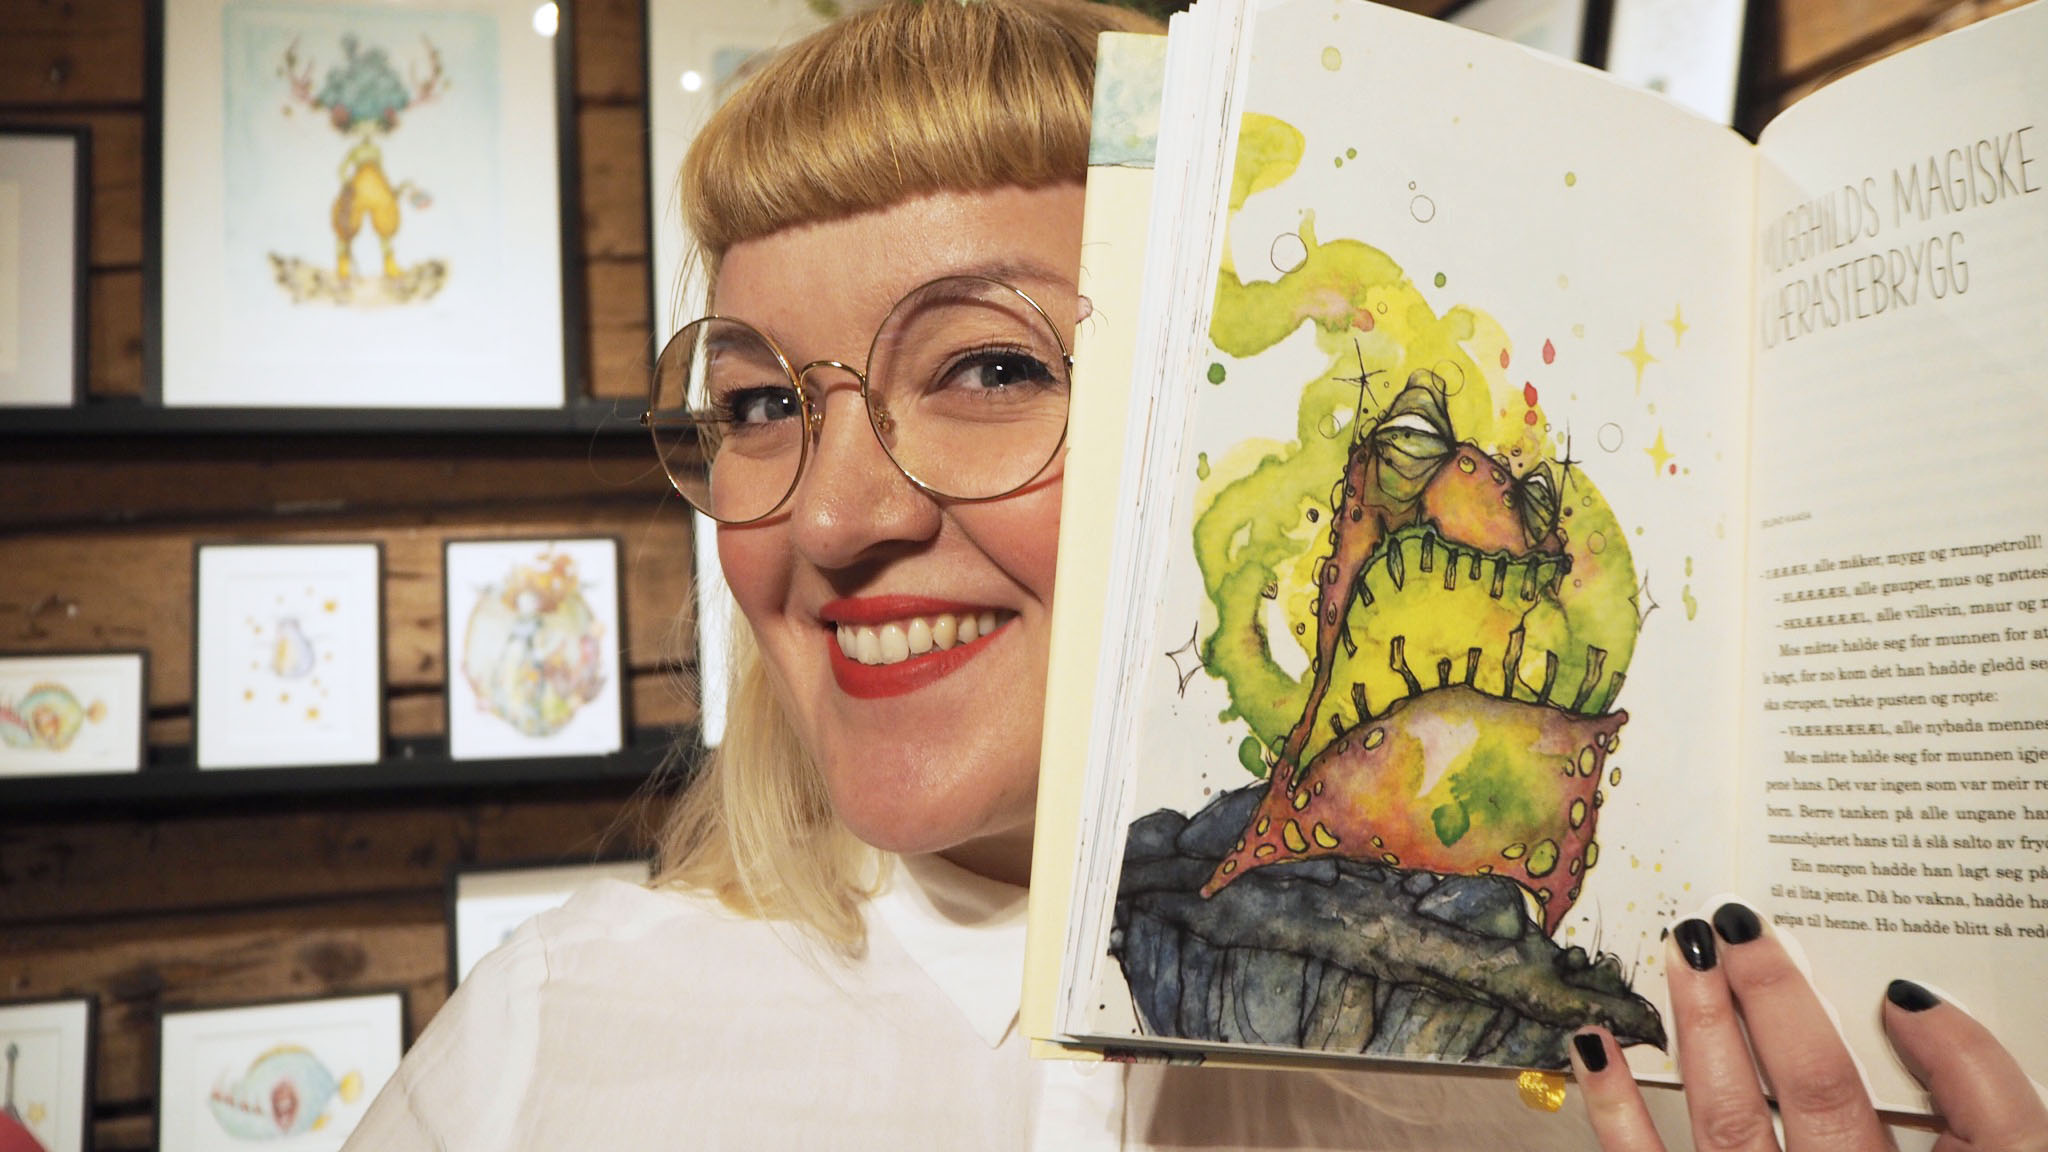 Picture of Gunvor Rasmussen holding a book with her watercolor illustrations